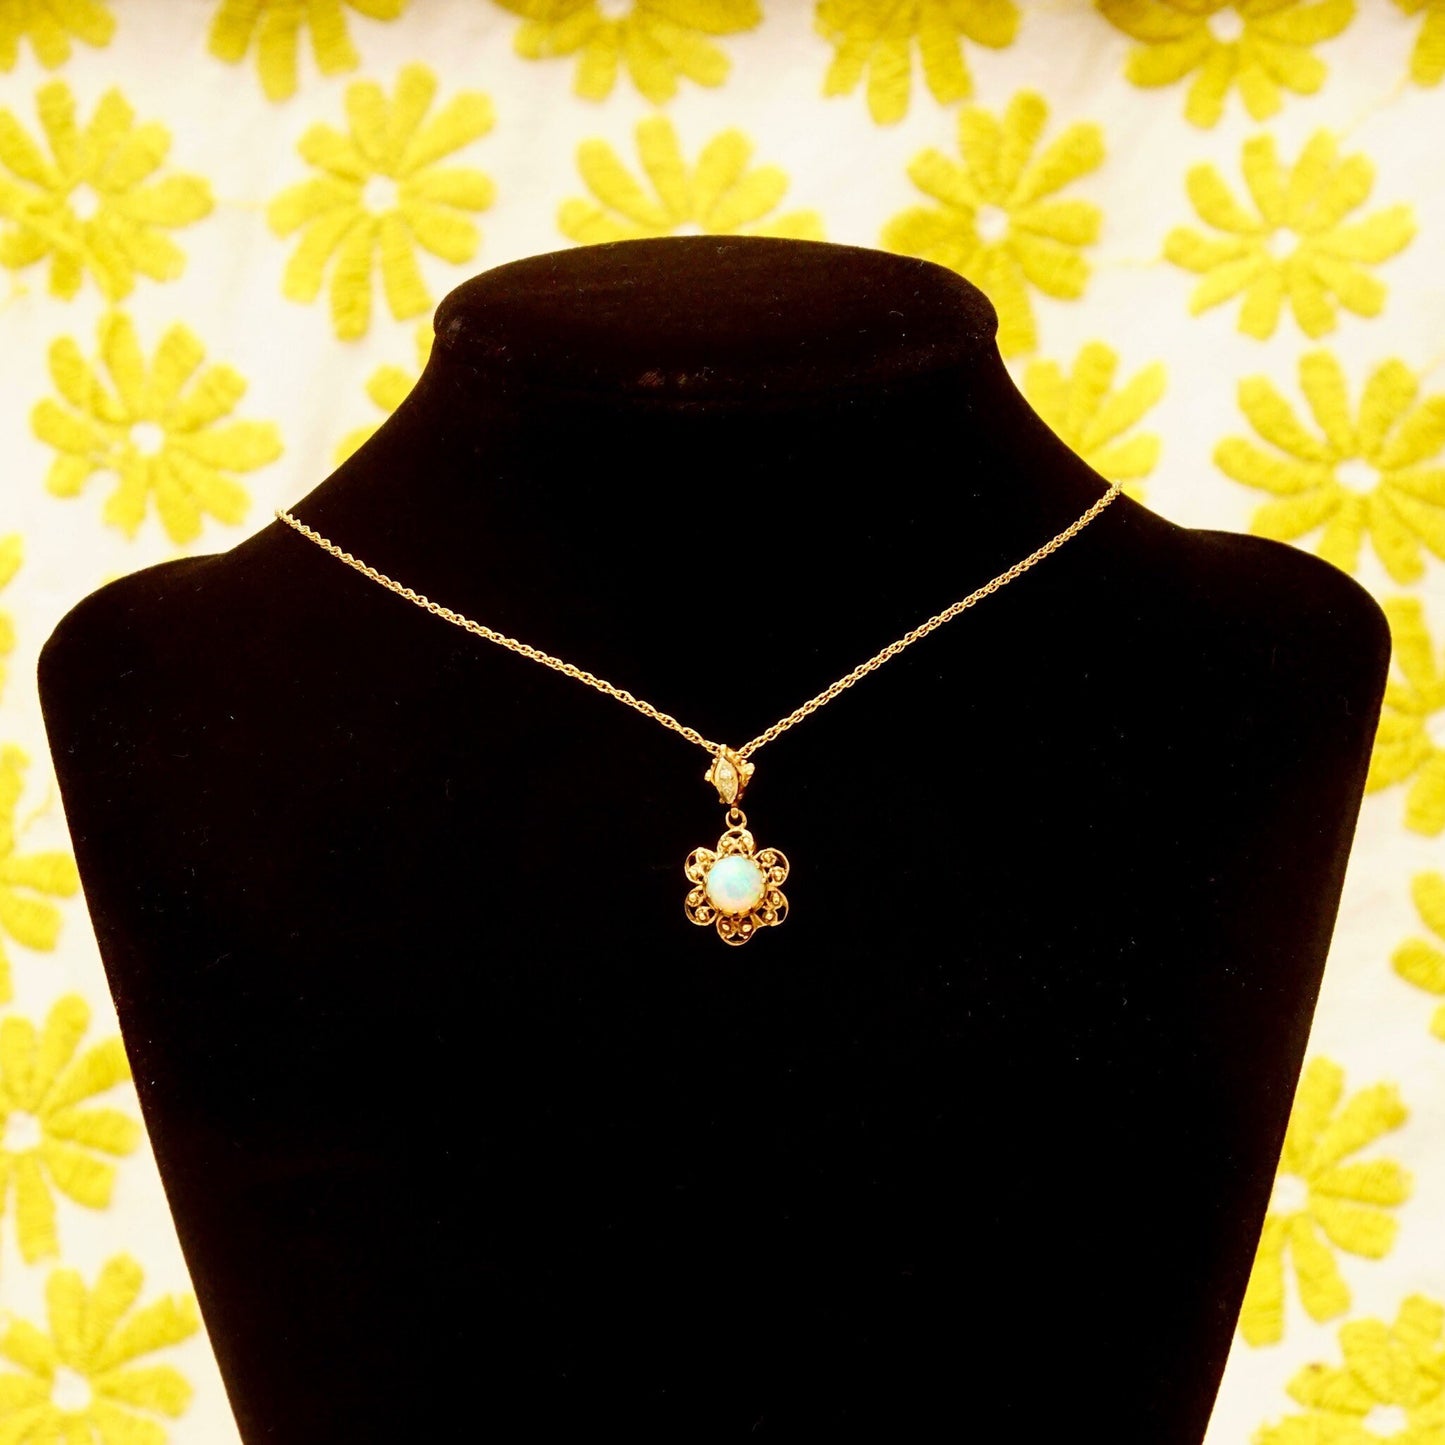 14K gold filigree opal flower pendant necklace with diamond accent bail on black velvet jewelry display stand against yellow floral wallpaper background.